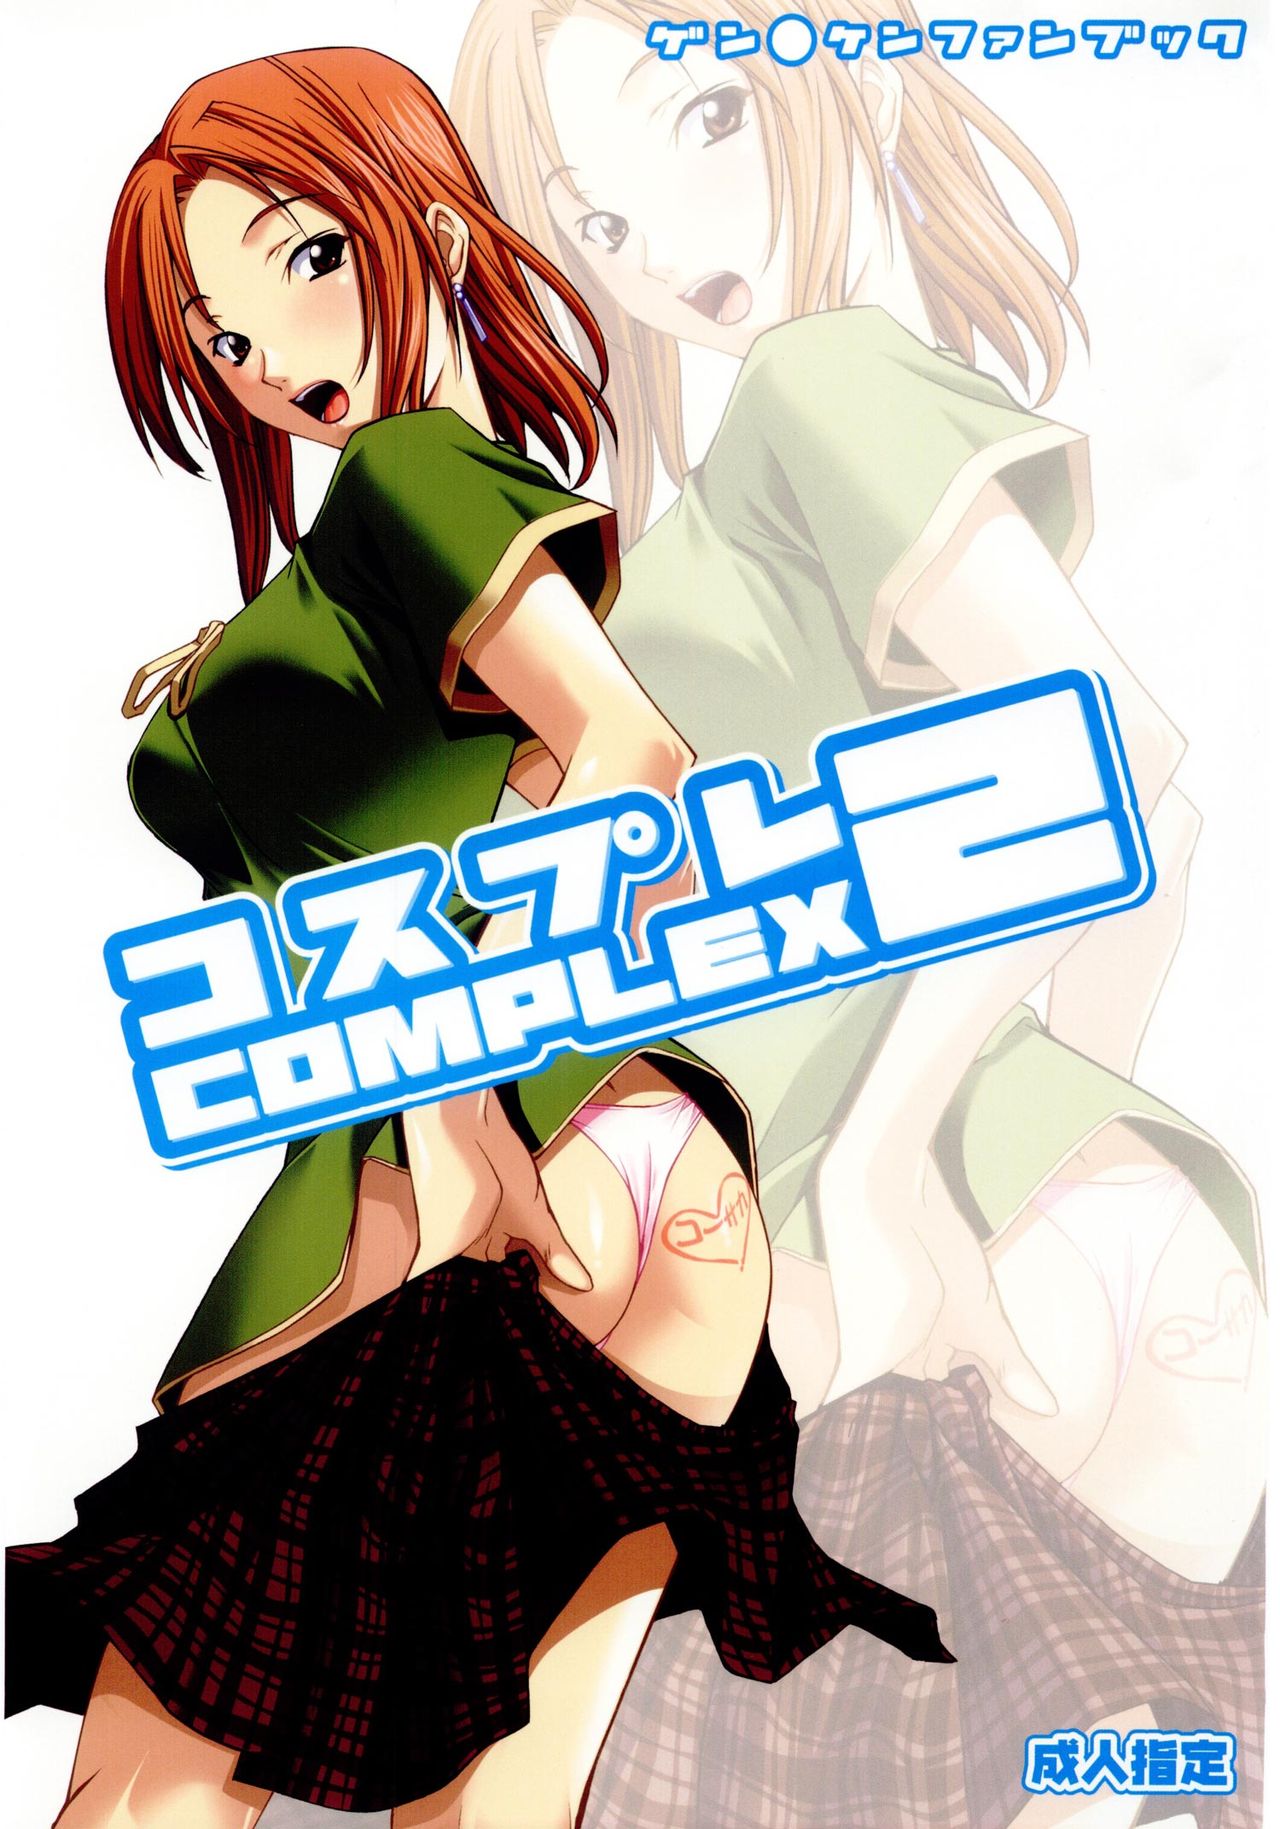 (C67) [P-Forest (Hozumi Takashi)] Cosplay COMPLEX 2 (Genshiken) [Incomplete] (C67) [P-Forest (穂積貴志)] コスプレCOMPLEX 2 (げんしけん) [不全]